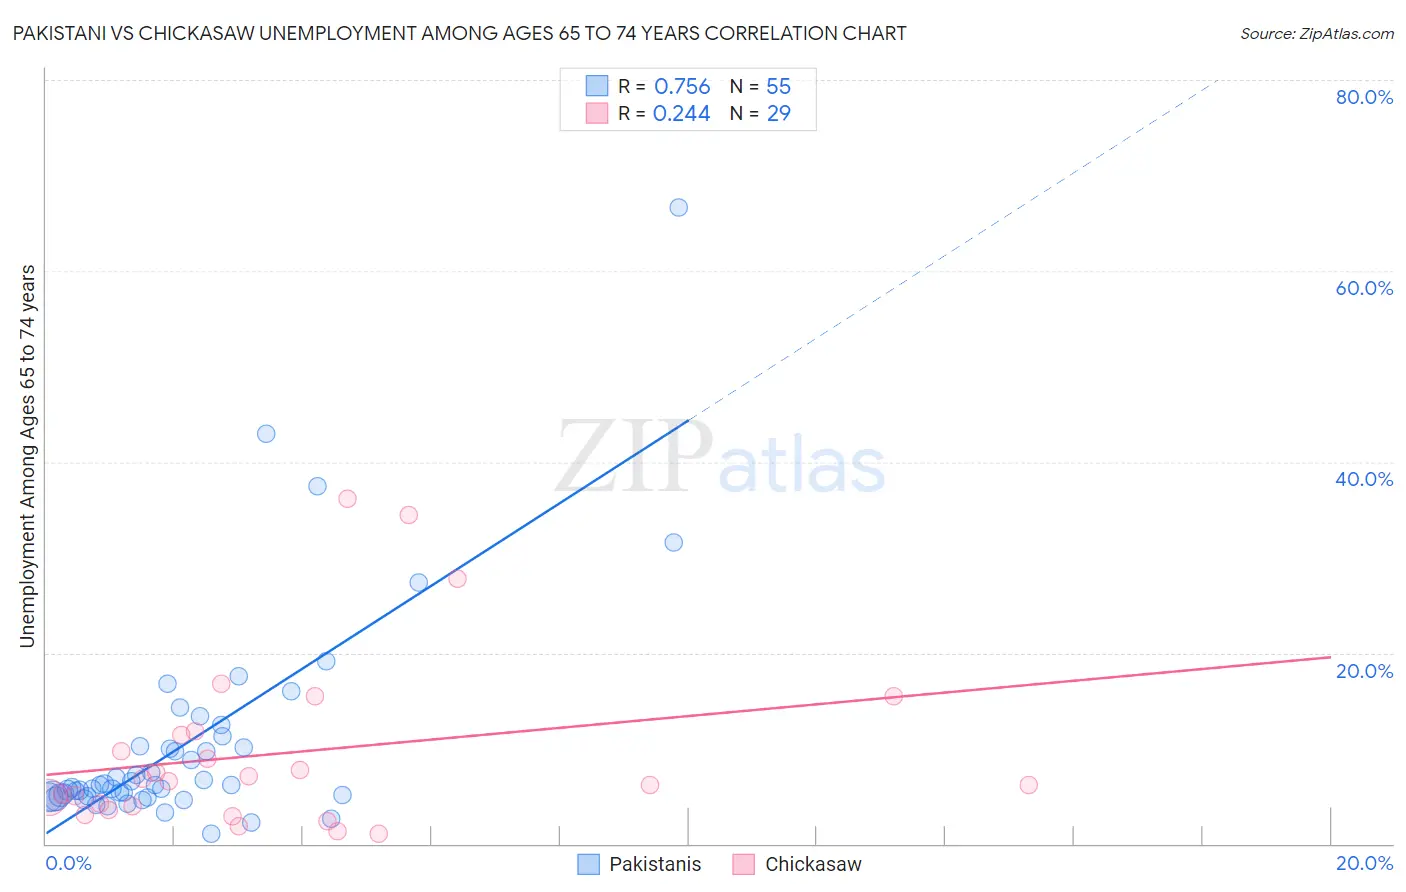 Pakistani vs Chickasaw Unemployment Among Ages 65 to 74 years